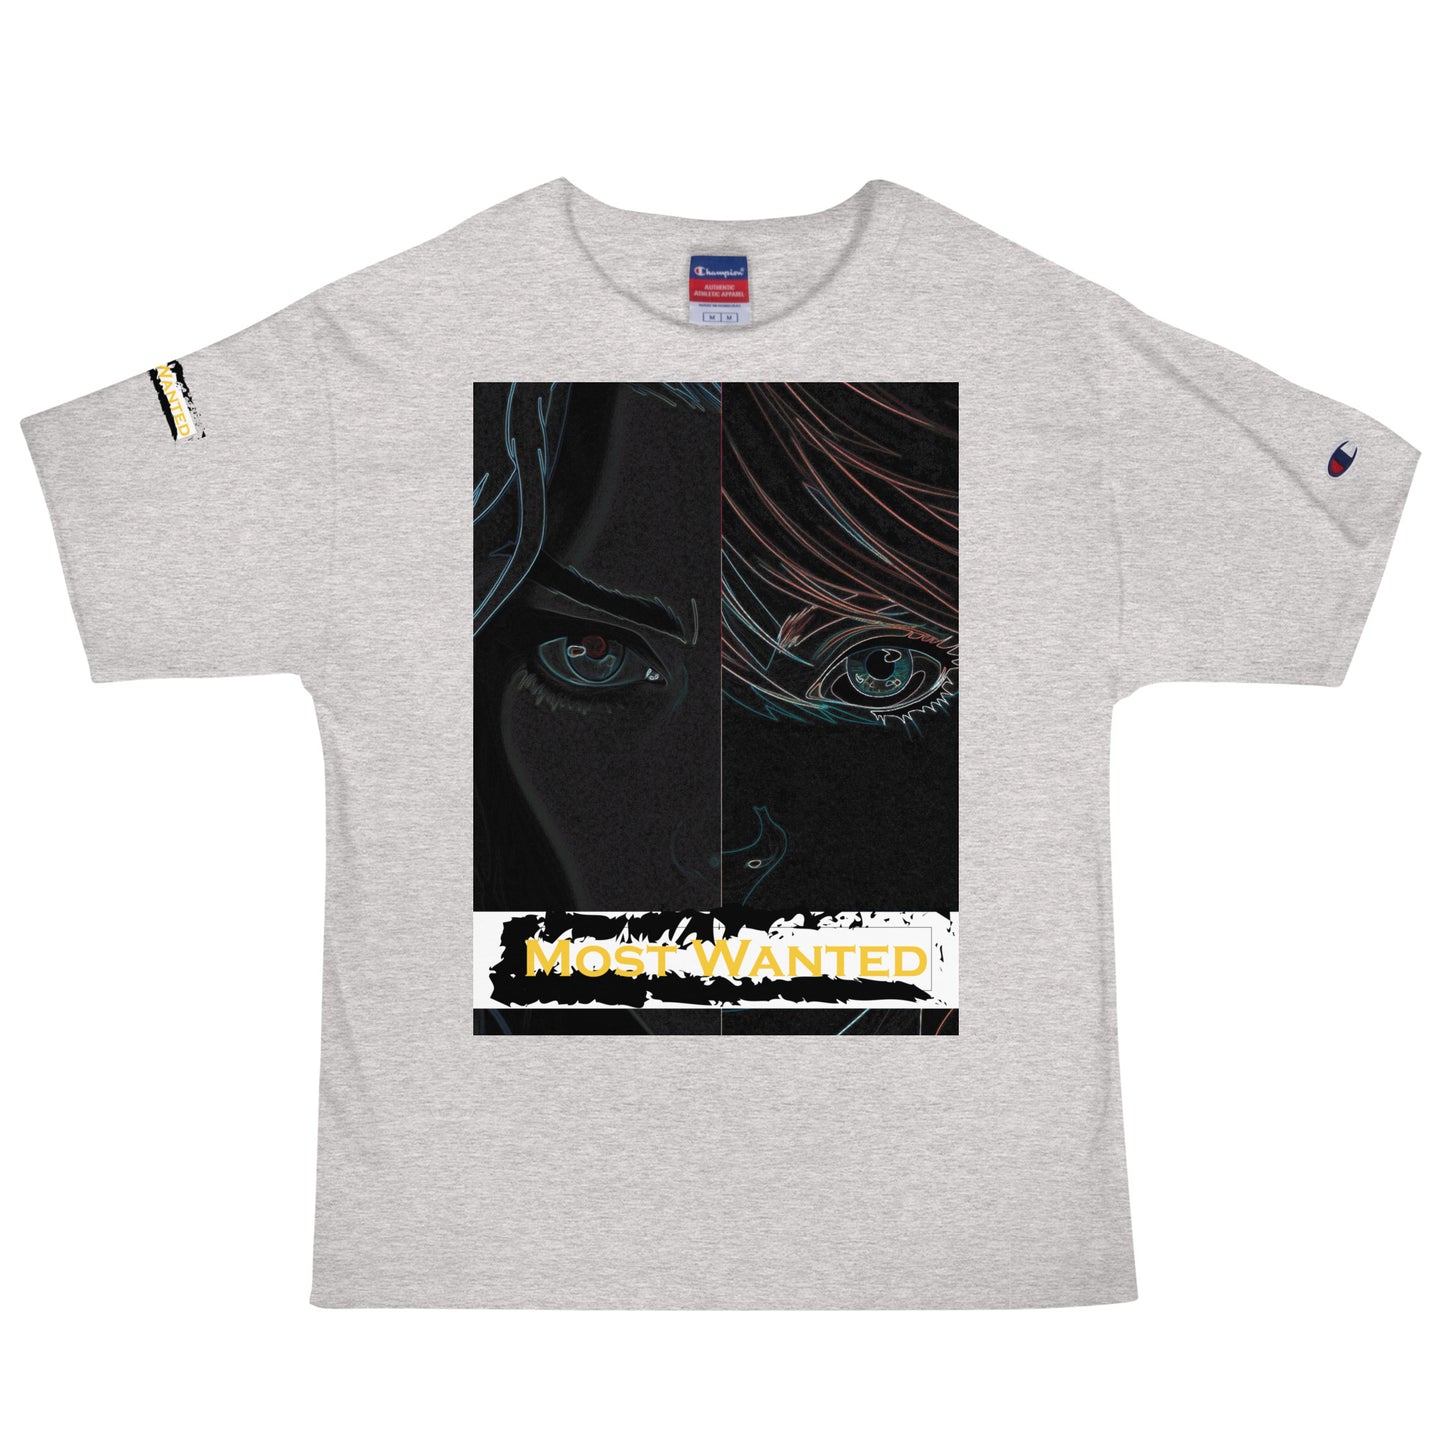 Its In the Eyes- Graphic Tee (Most Wanted) #2